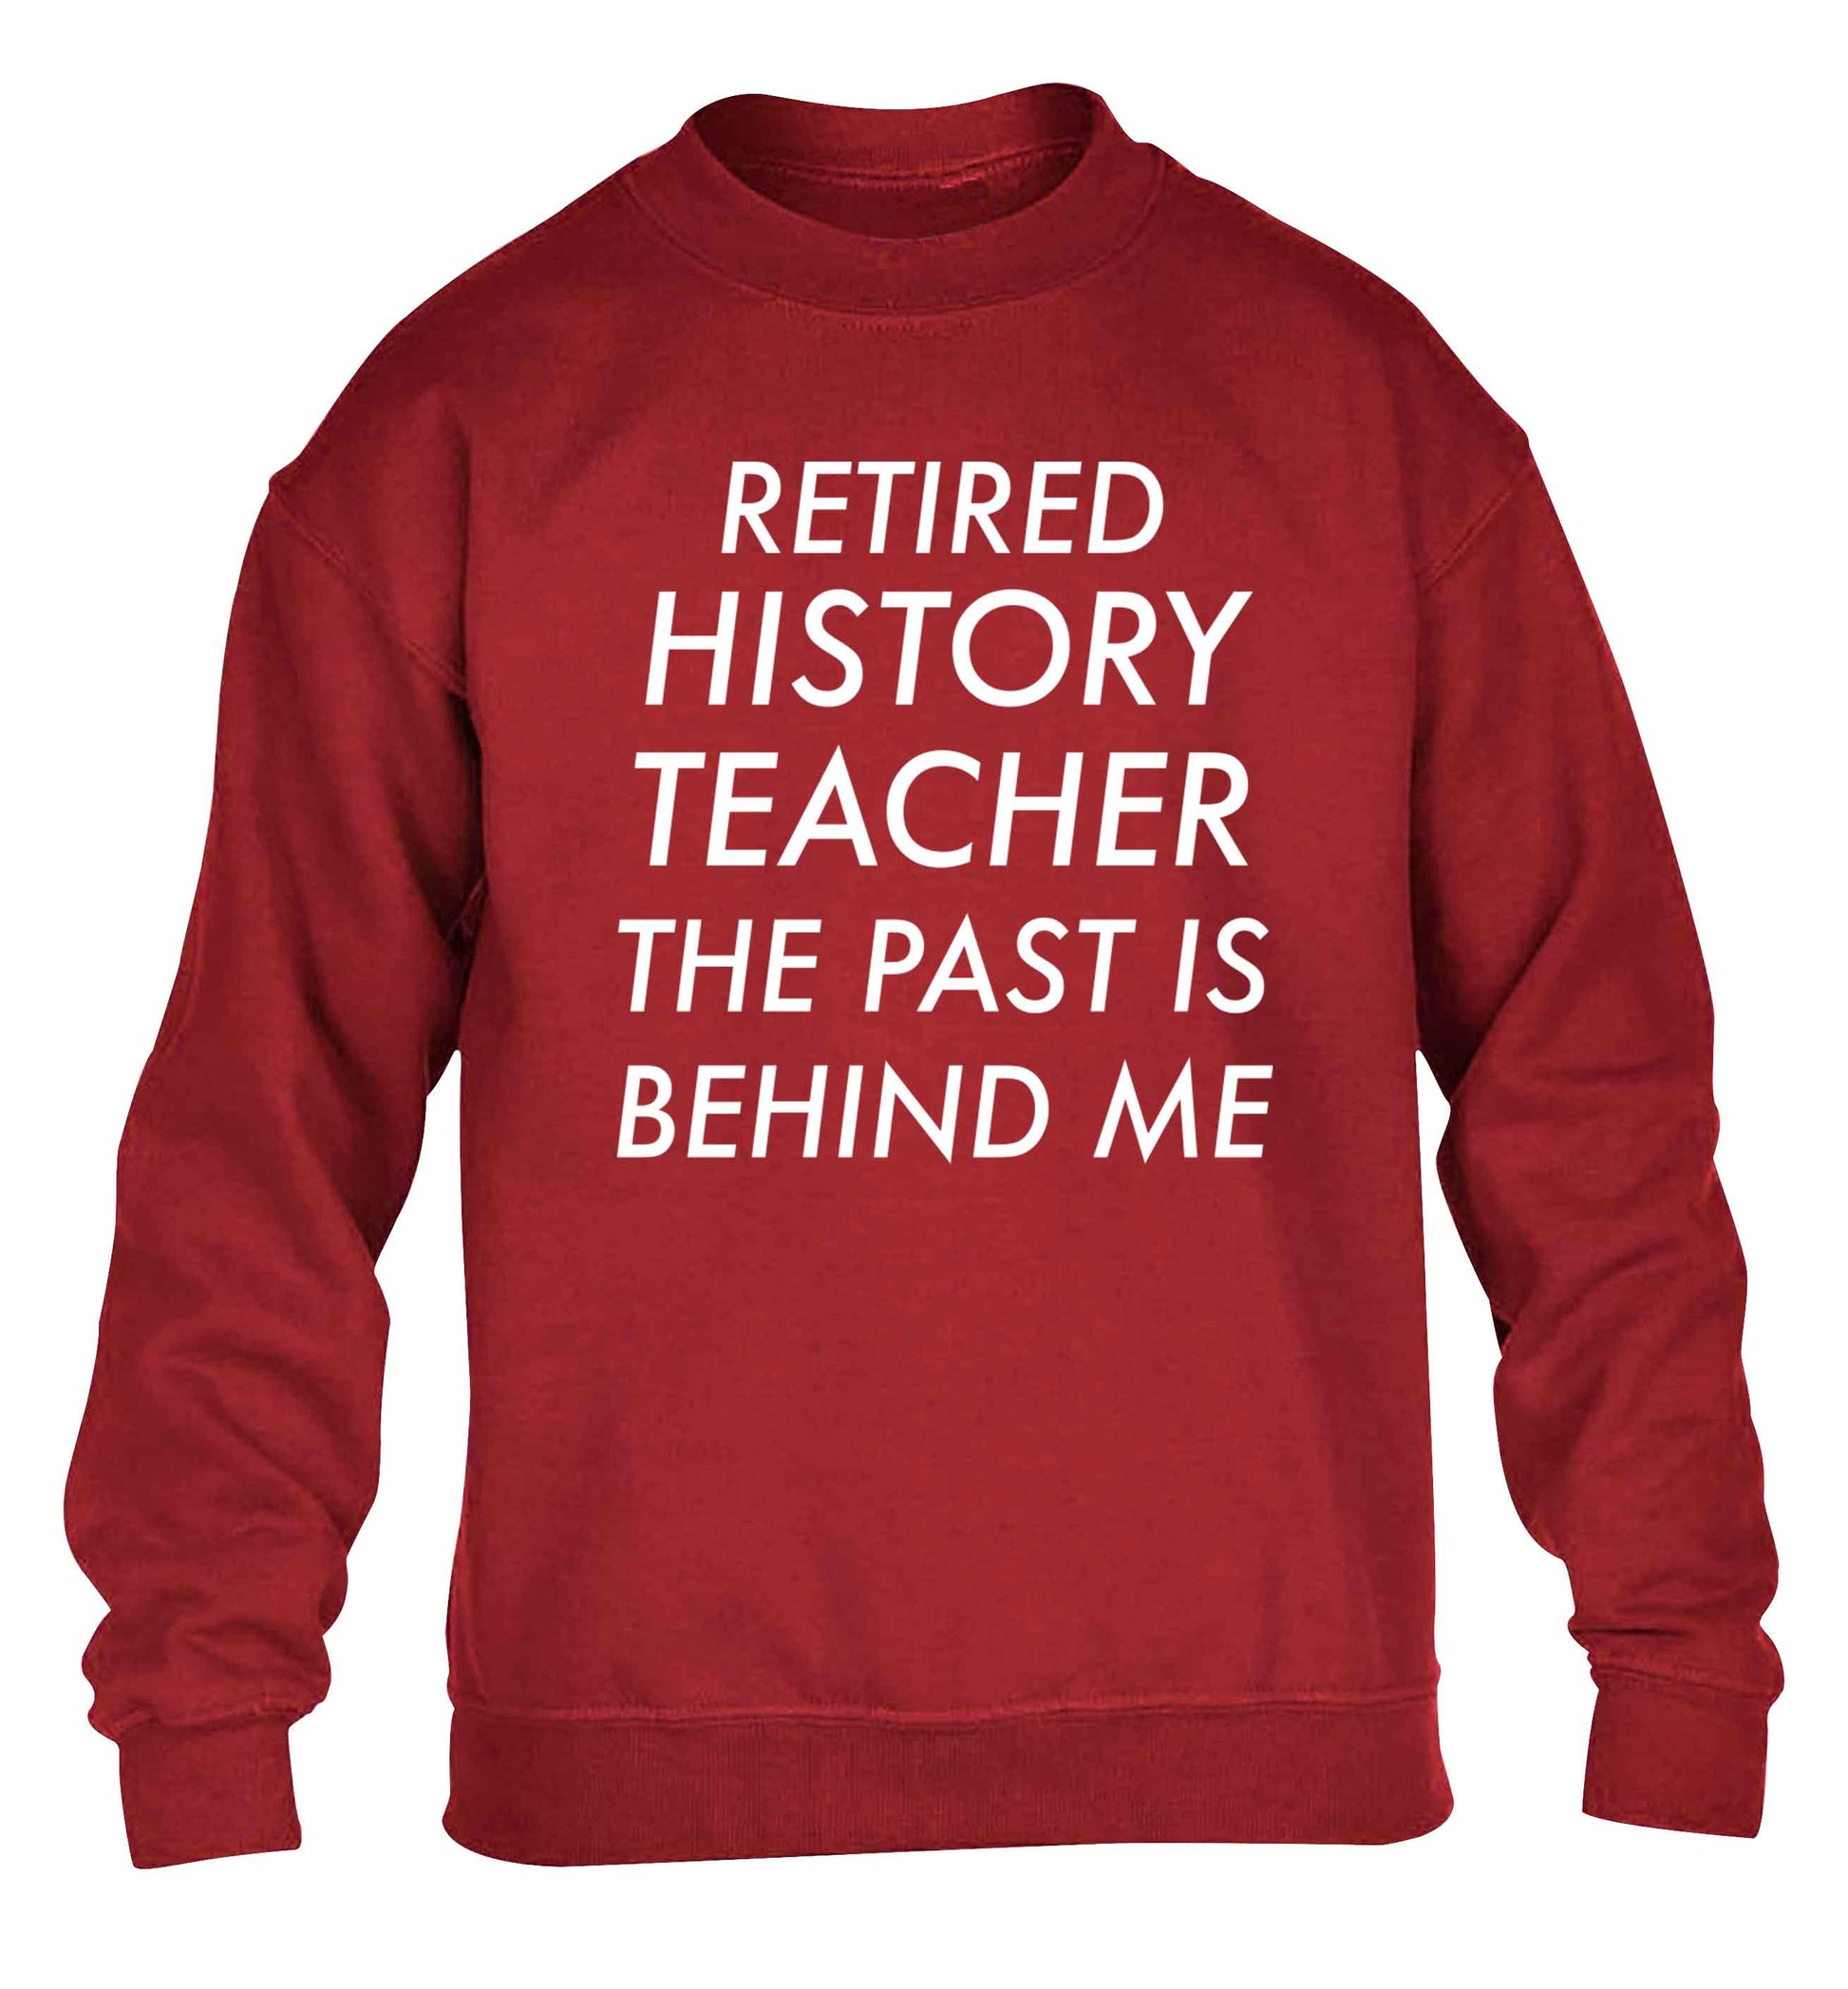 Retired history teacher the past is behind me children's grey sweater 12-13 Years